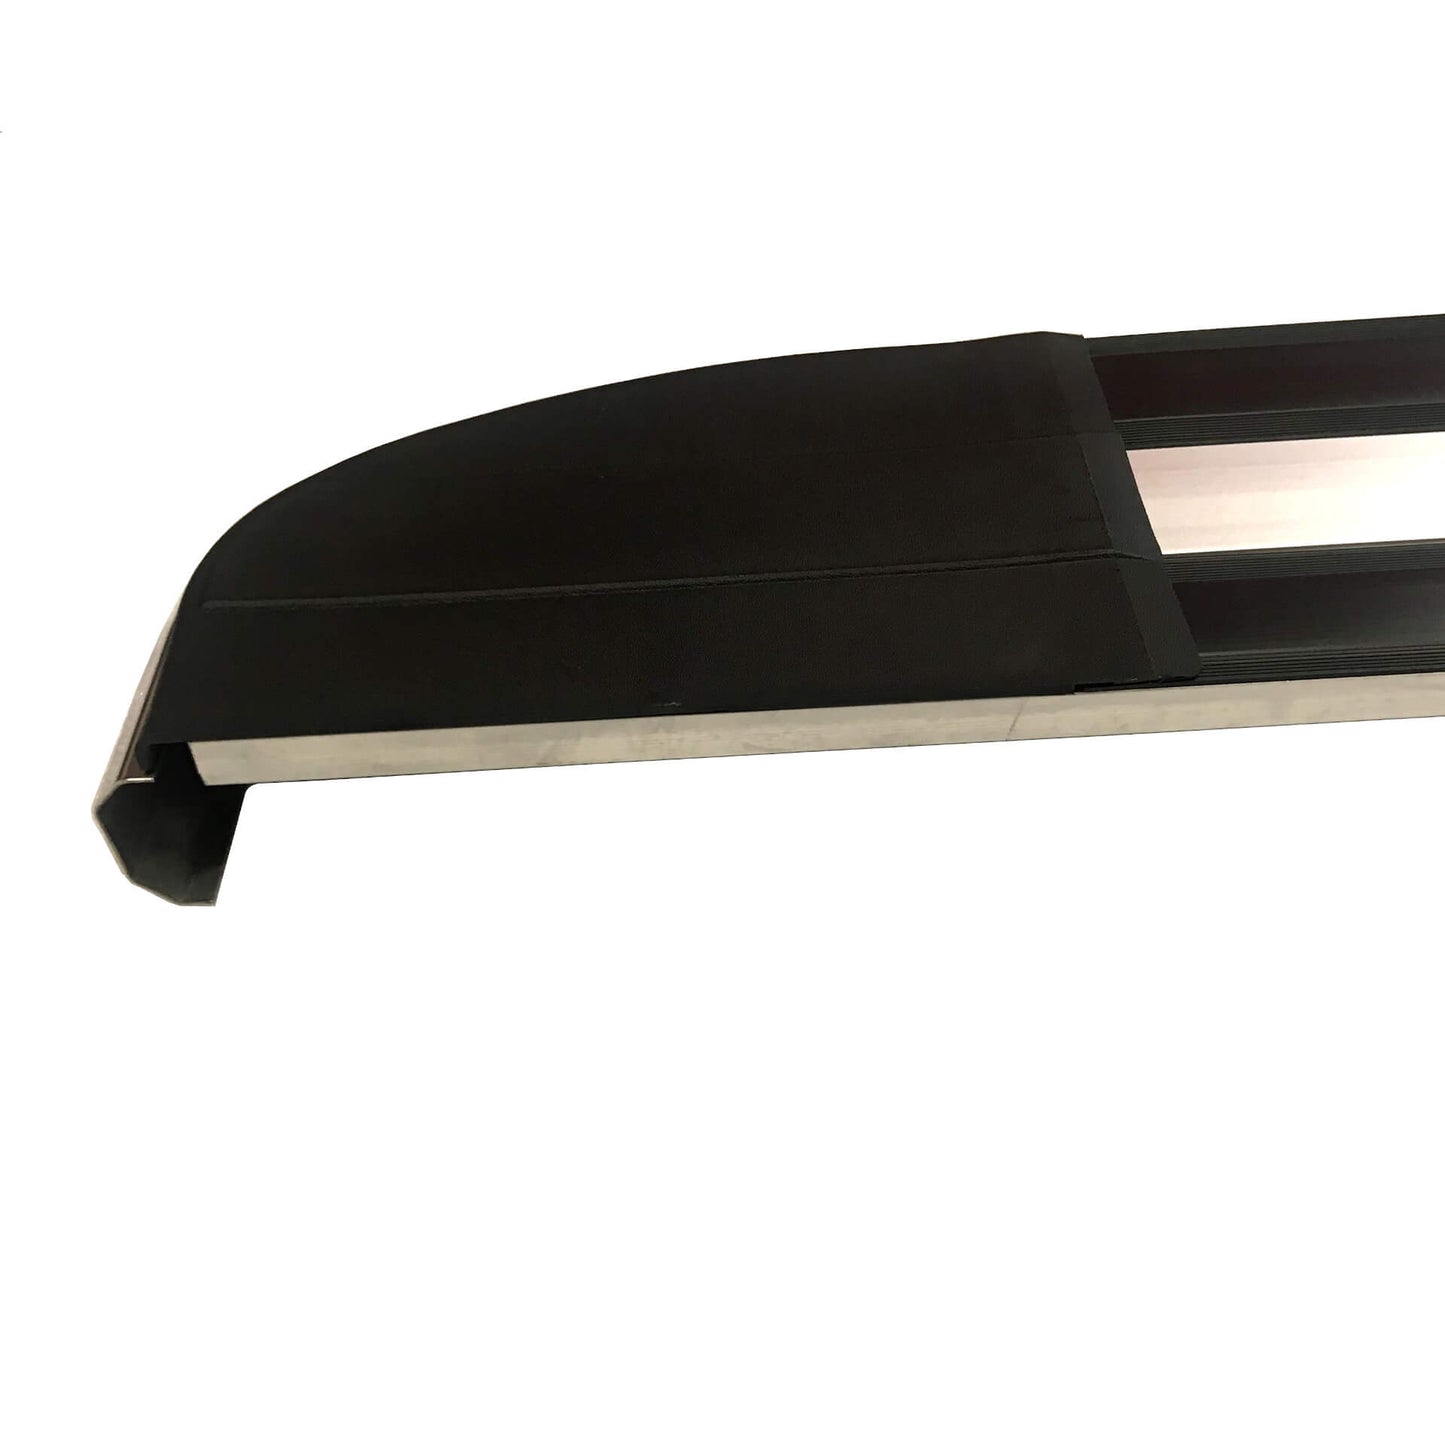 Panther Side Steps Running Boards for Mitsubishi Outlander PHEV 2013-2021 -  - sold by Direct4x4